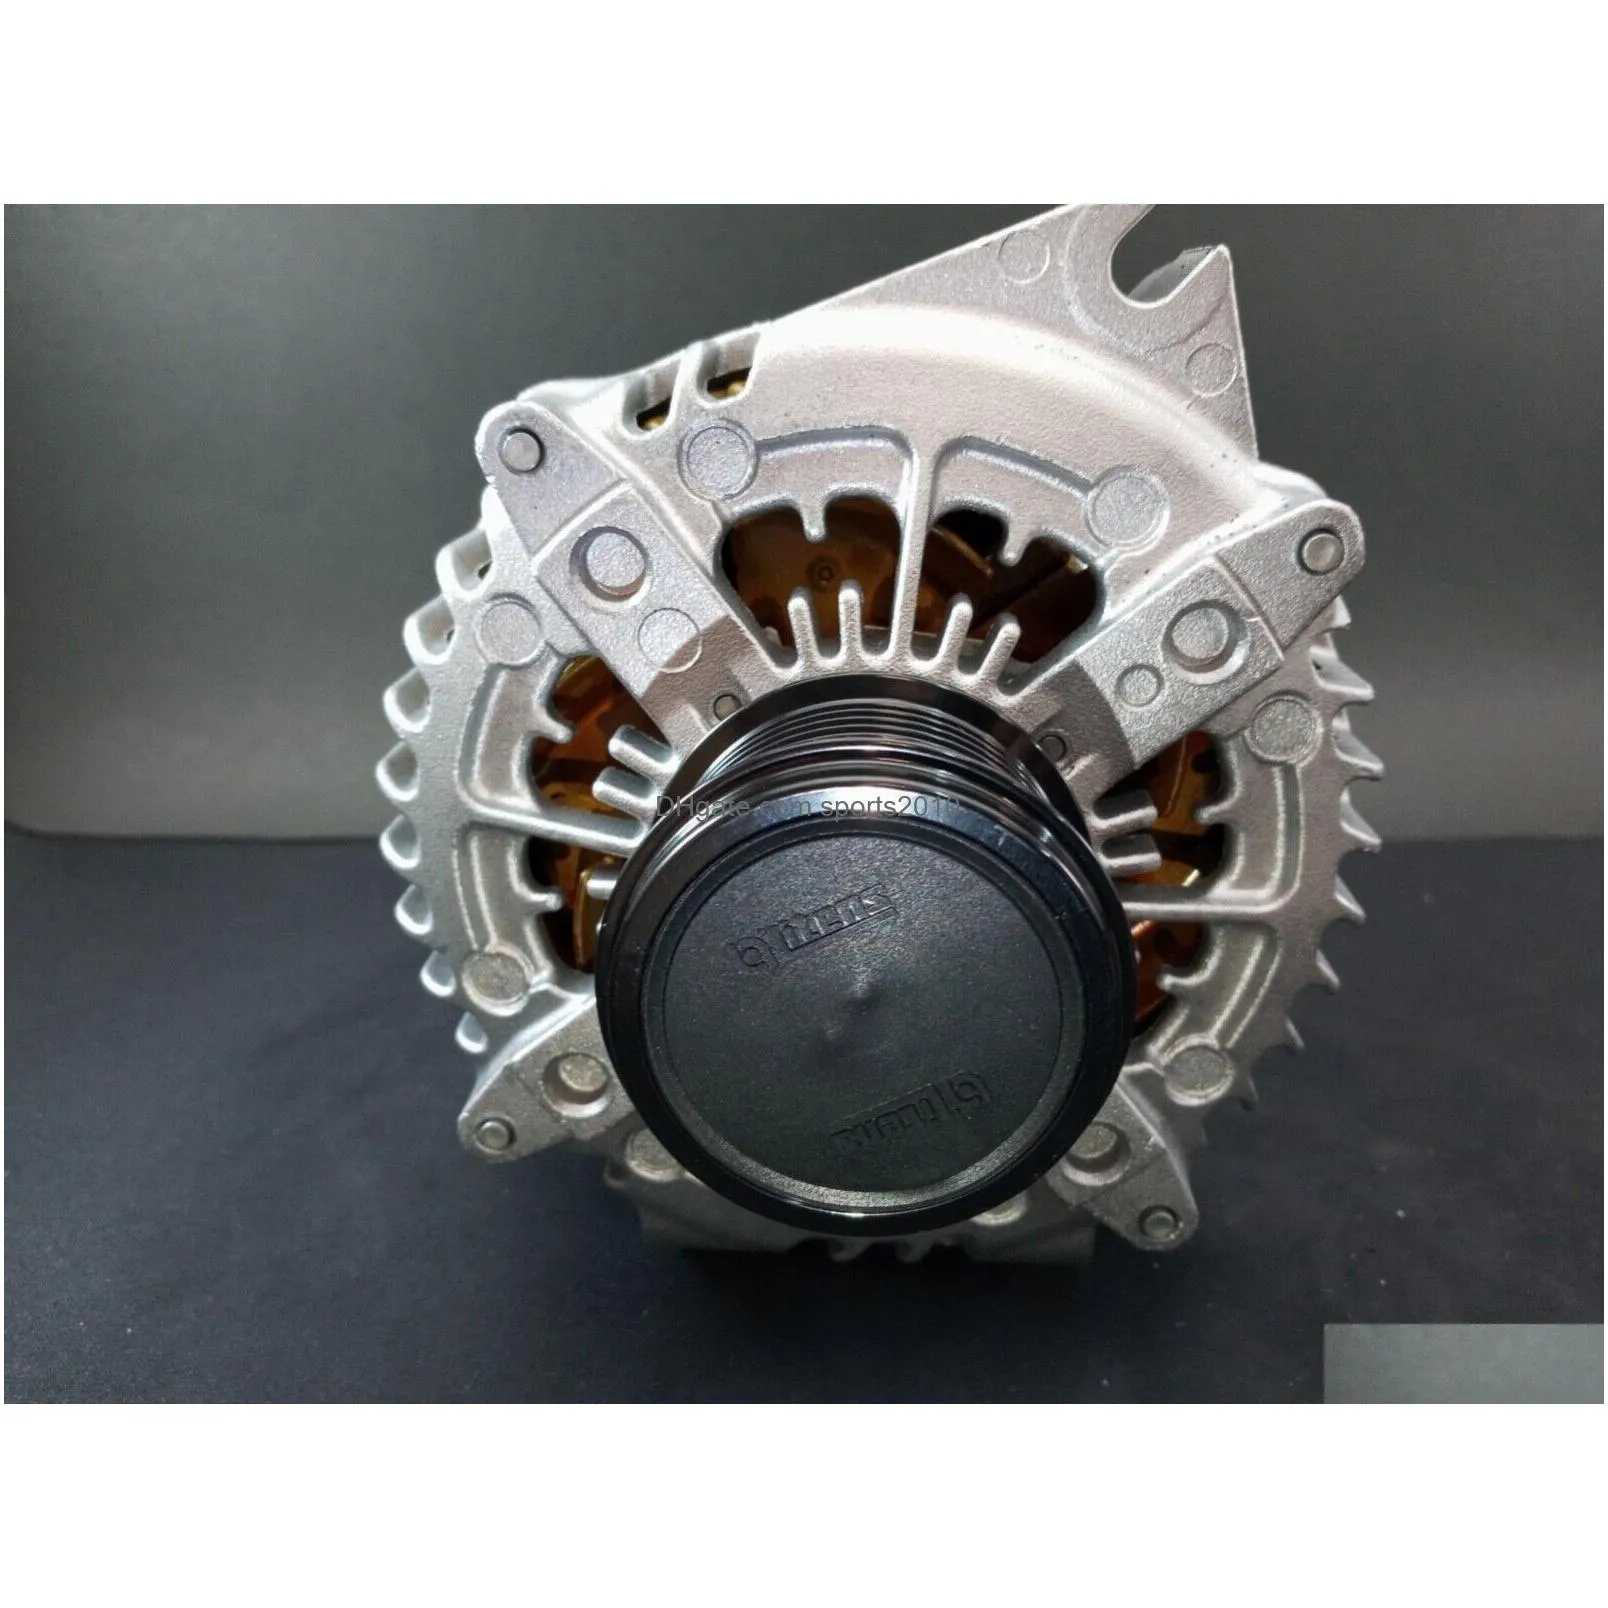 Engine Cleaning & Maintenance Alternator For -2022 Chrysler Pacifica V6 3.6L 3604Cc 220Cid Phev Drop Delivery Automobiles Motorcycles Dhjto